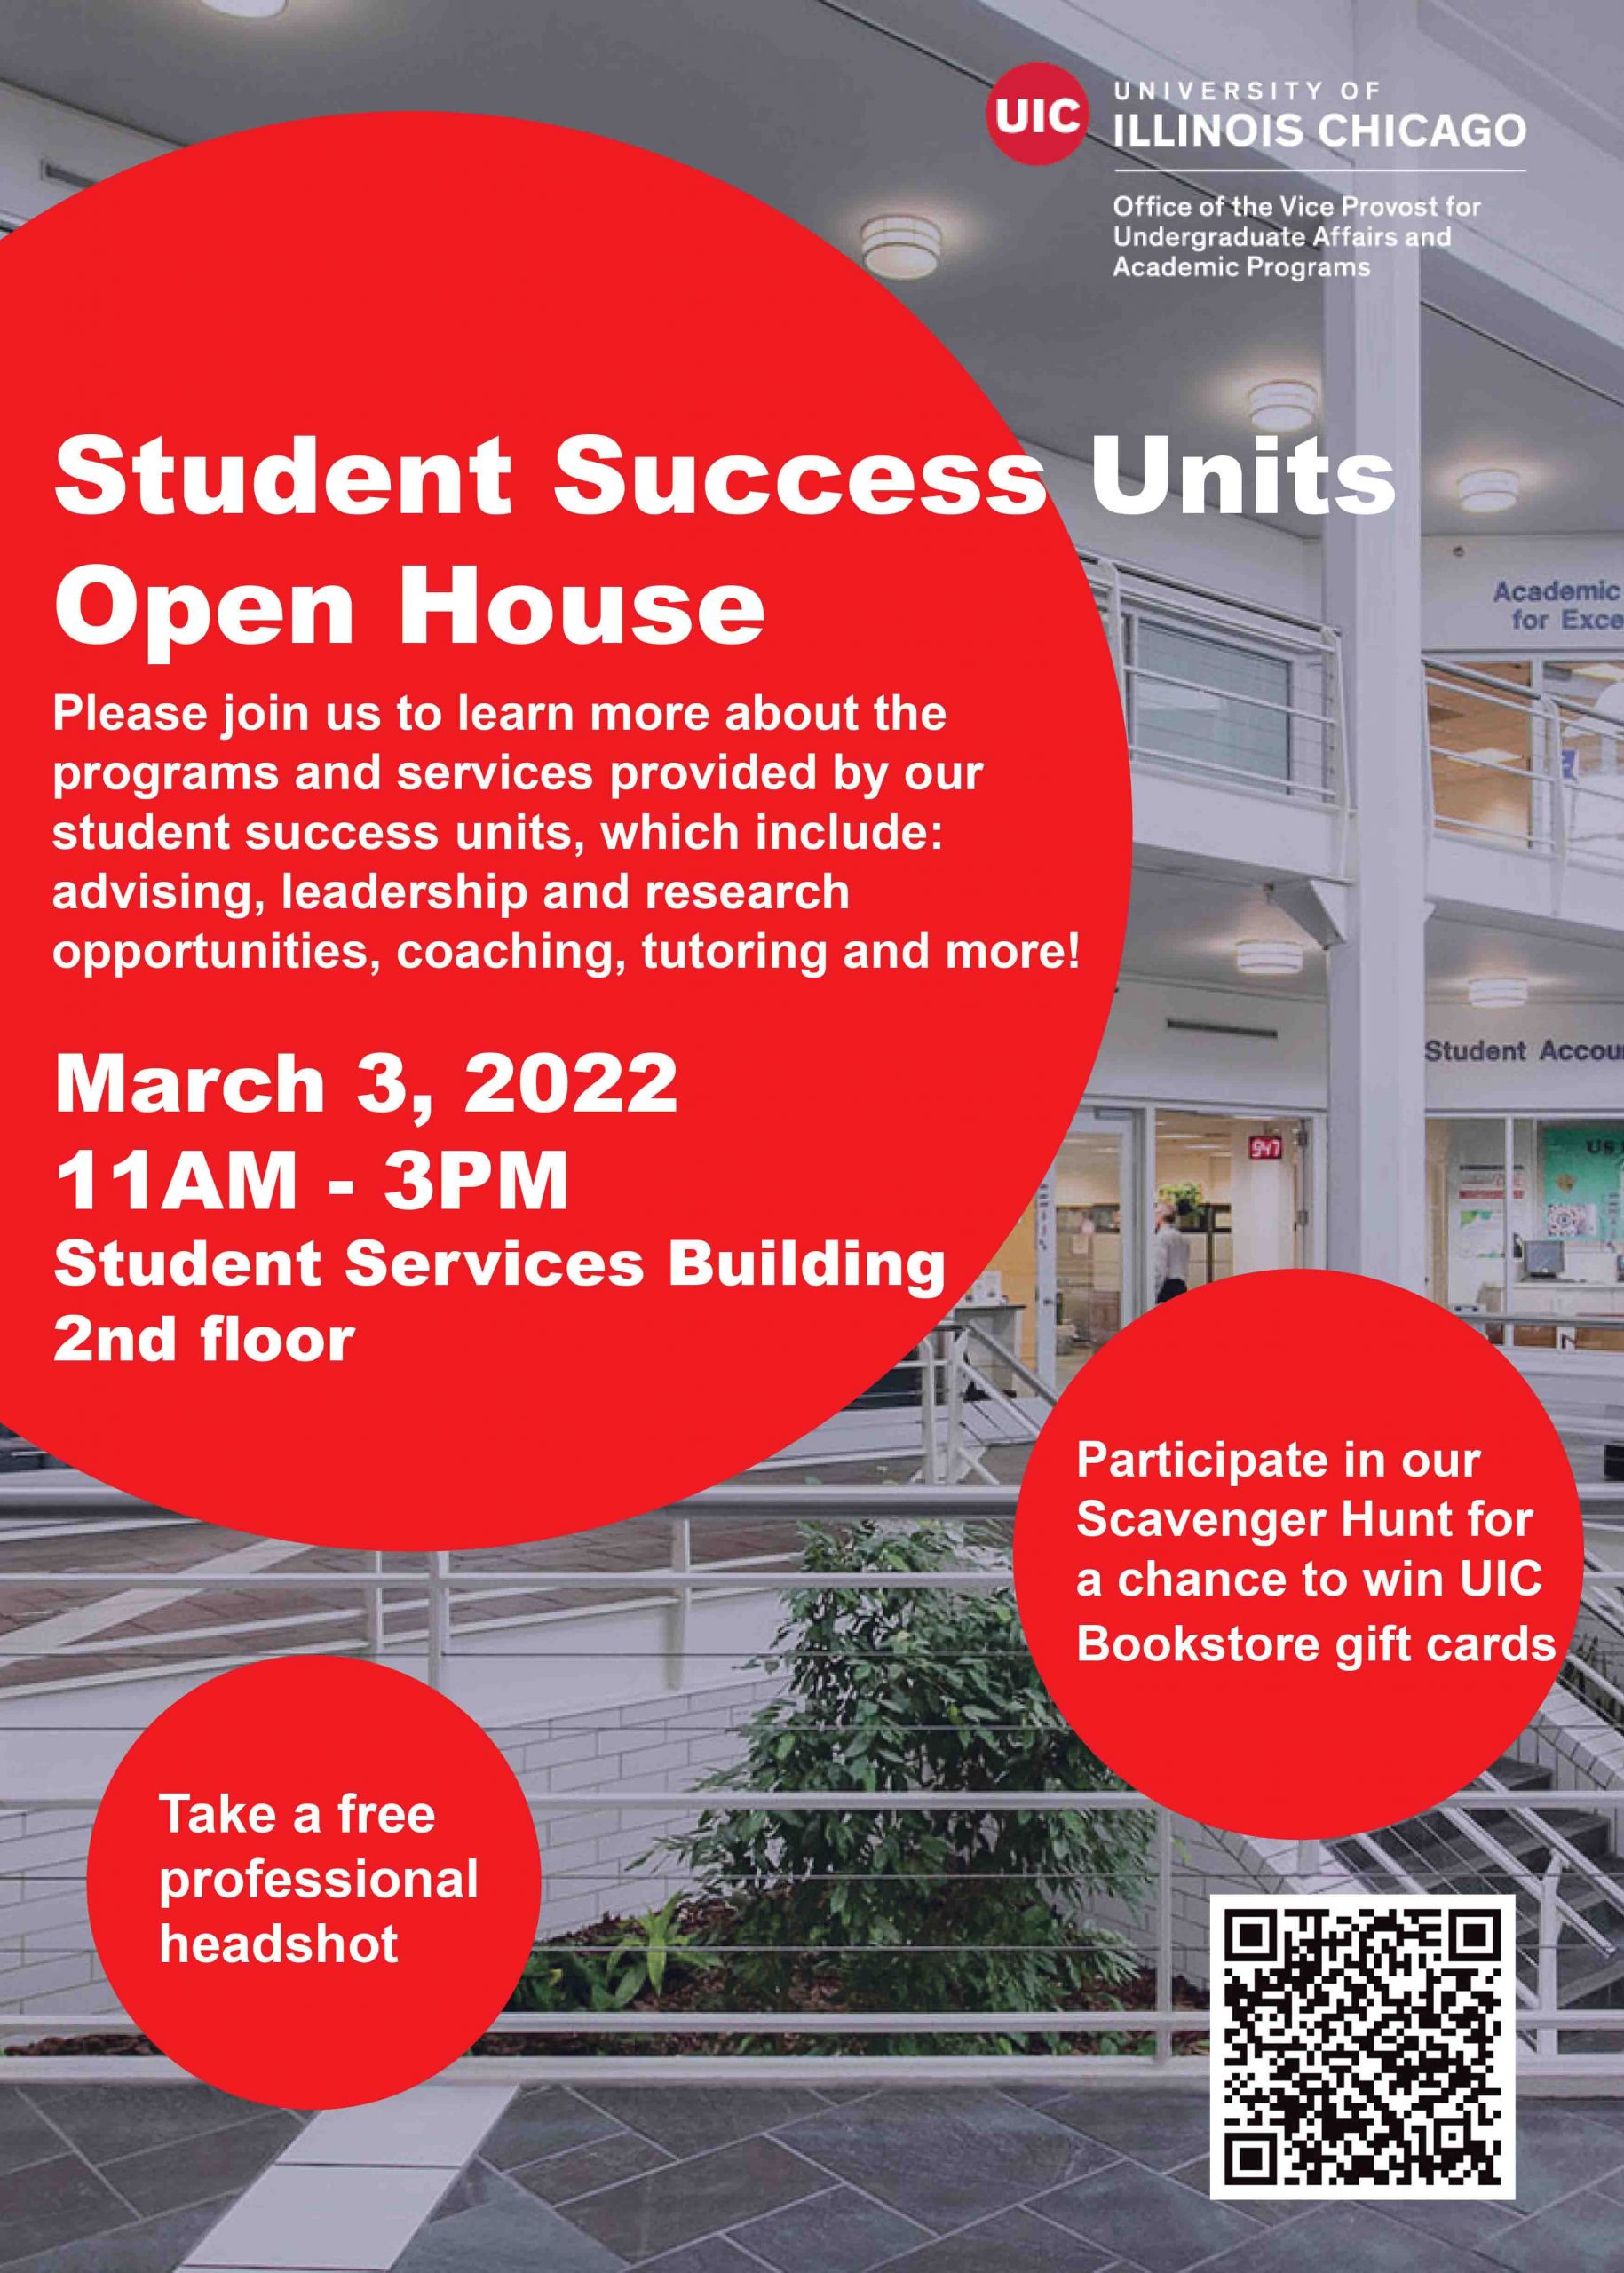 Student Success Units Open House UIC today